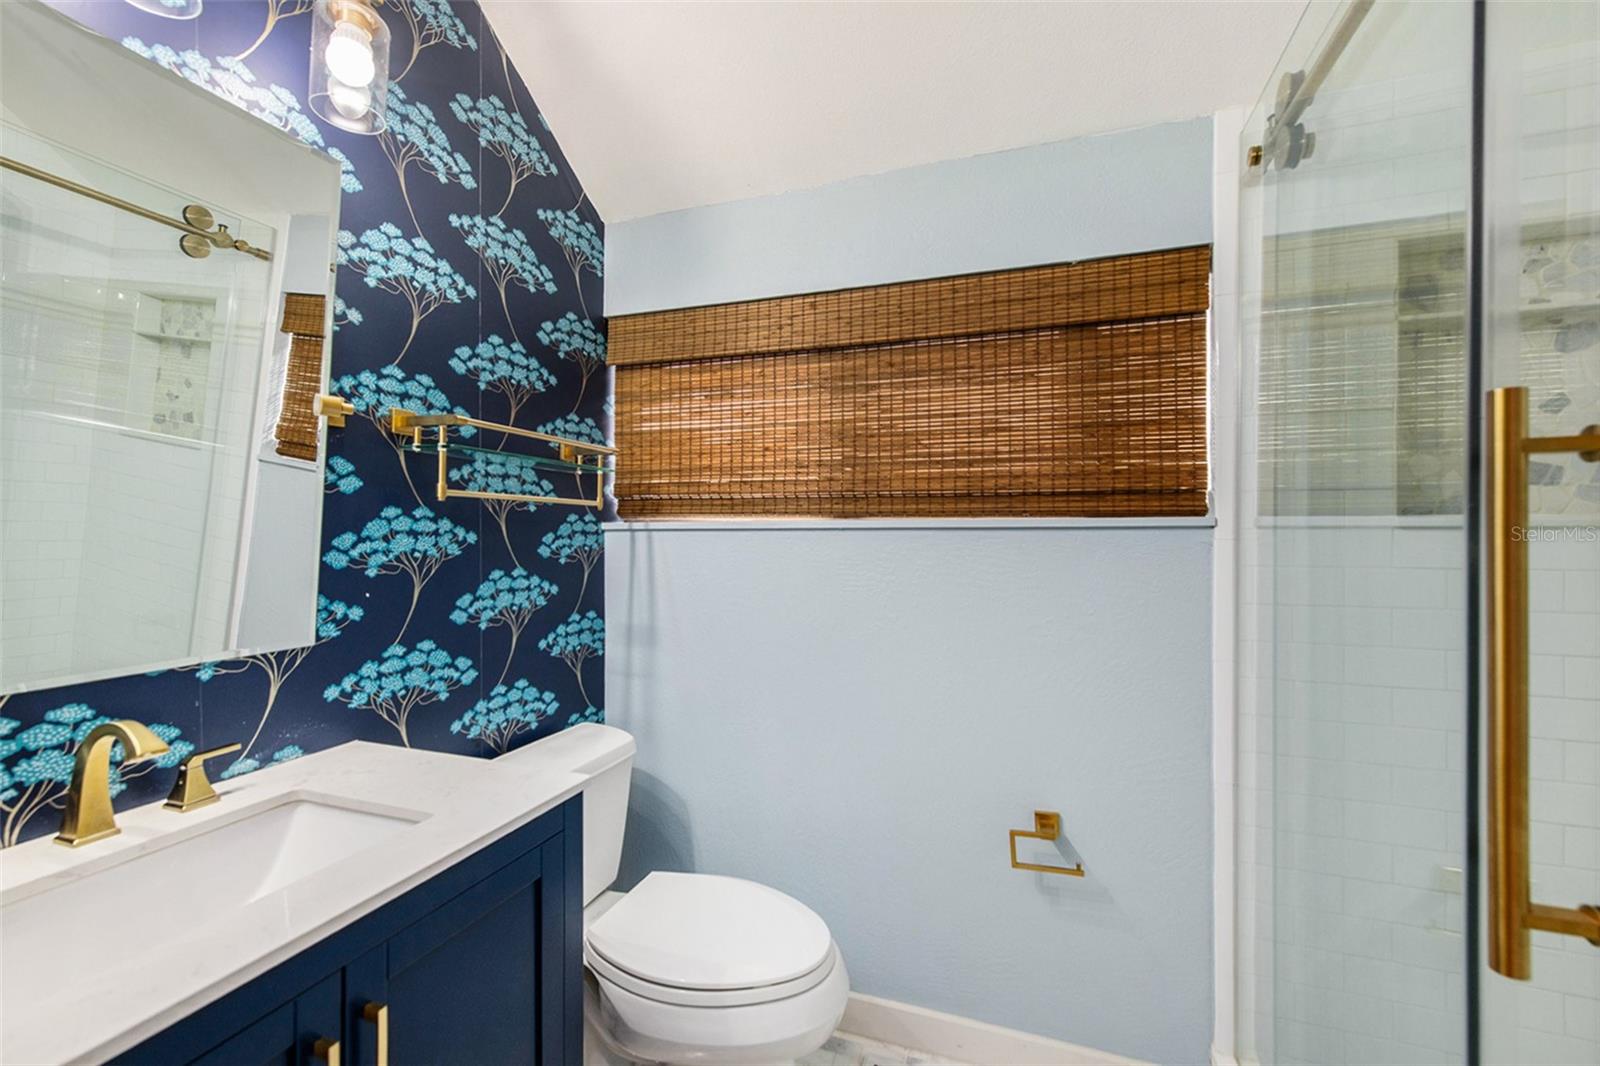 2nd bathroom in upstairs loft features updated fixtures and a gorgeous accent wall